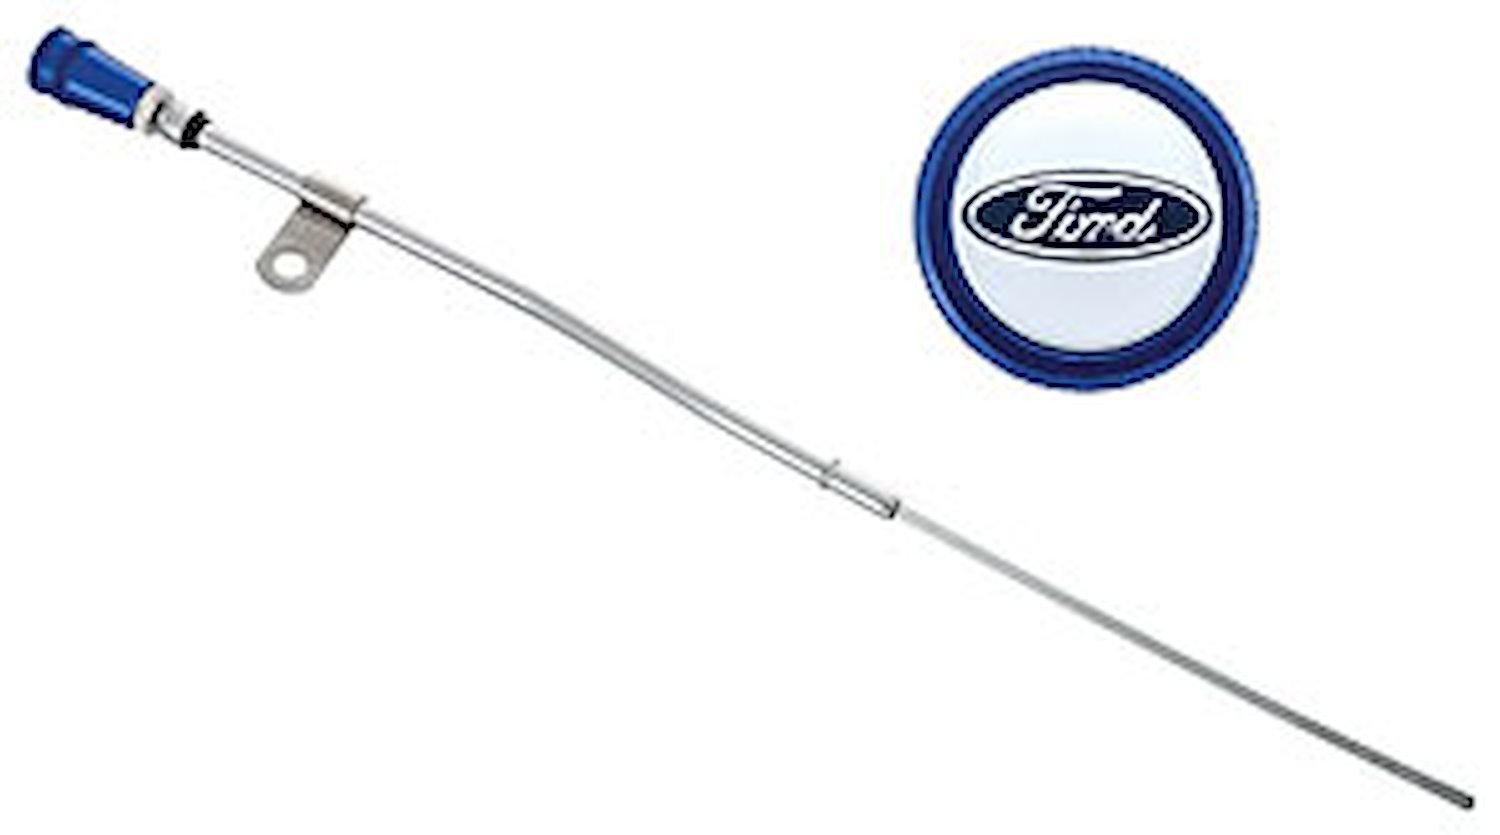 Engine Oil Dipstick for 1962-1978 Ford 289-302-351W in Chrome Finish with Blue Anodized Knurled Handle